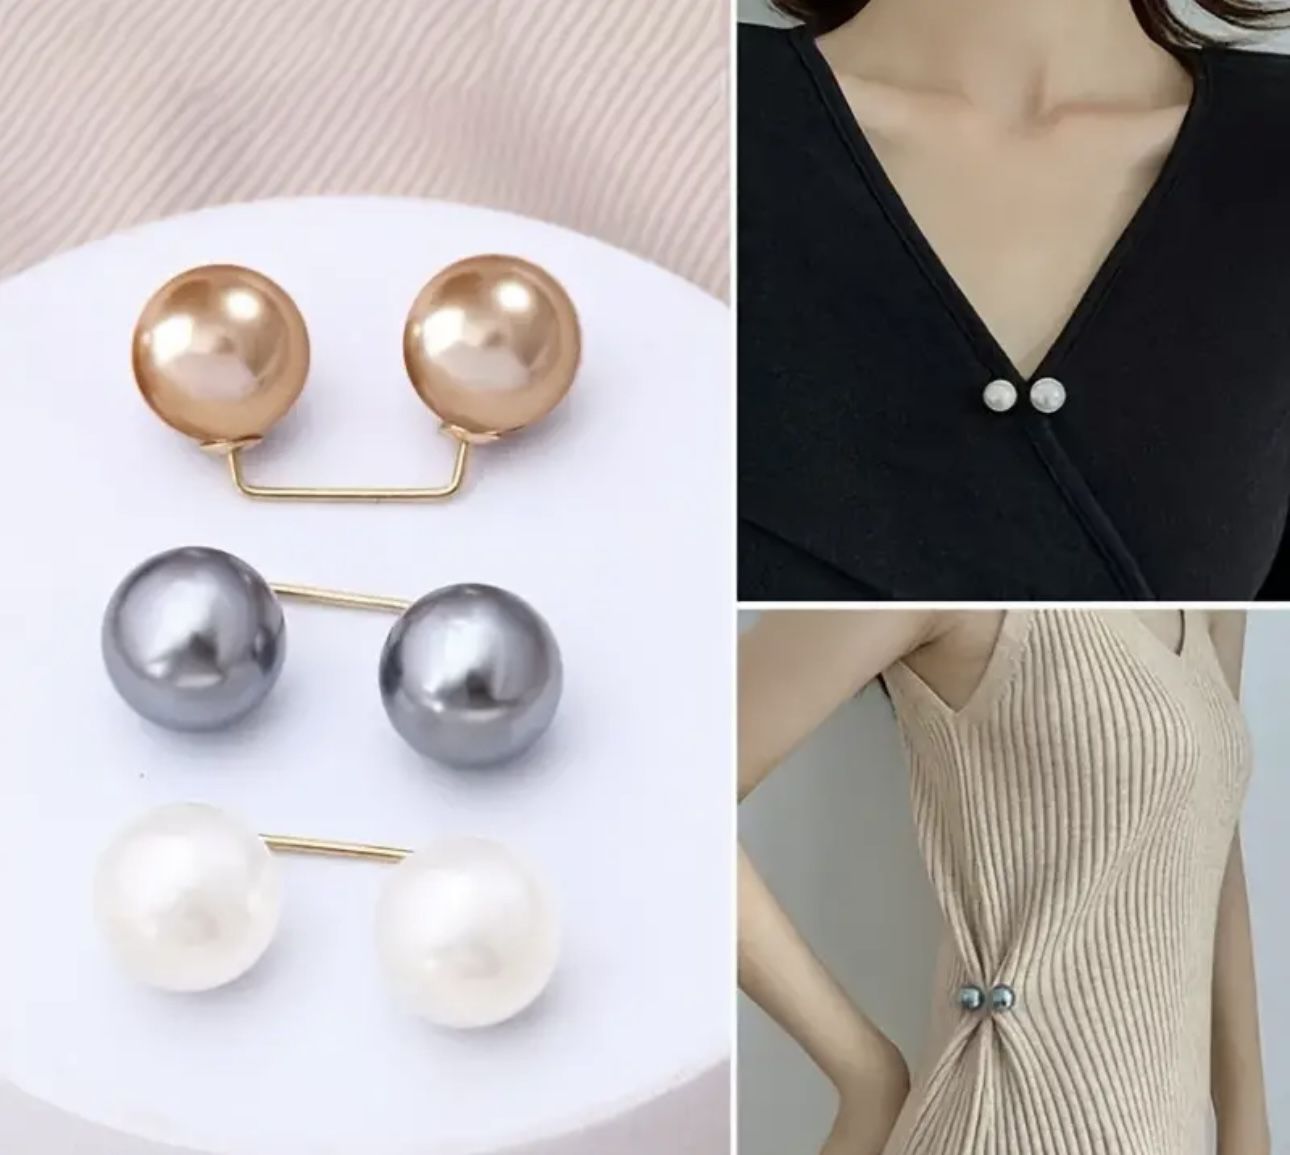 3pcs/Set Faux Pearl Brooch Pin Delicate Waist Buckle Fixed Clothes